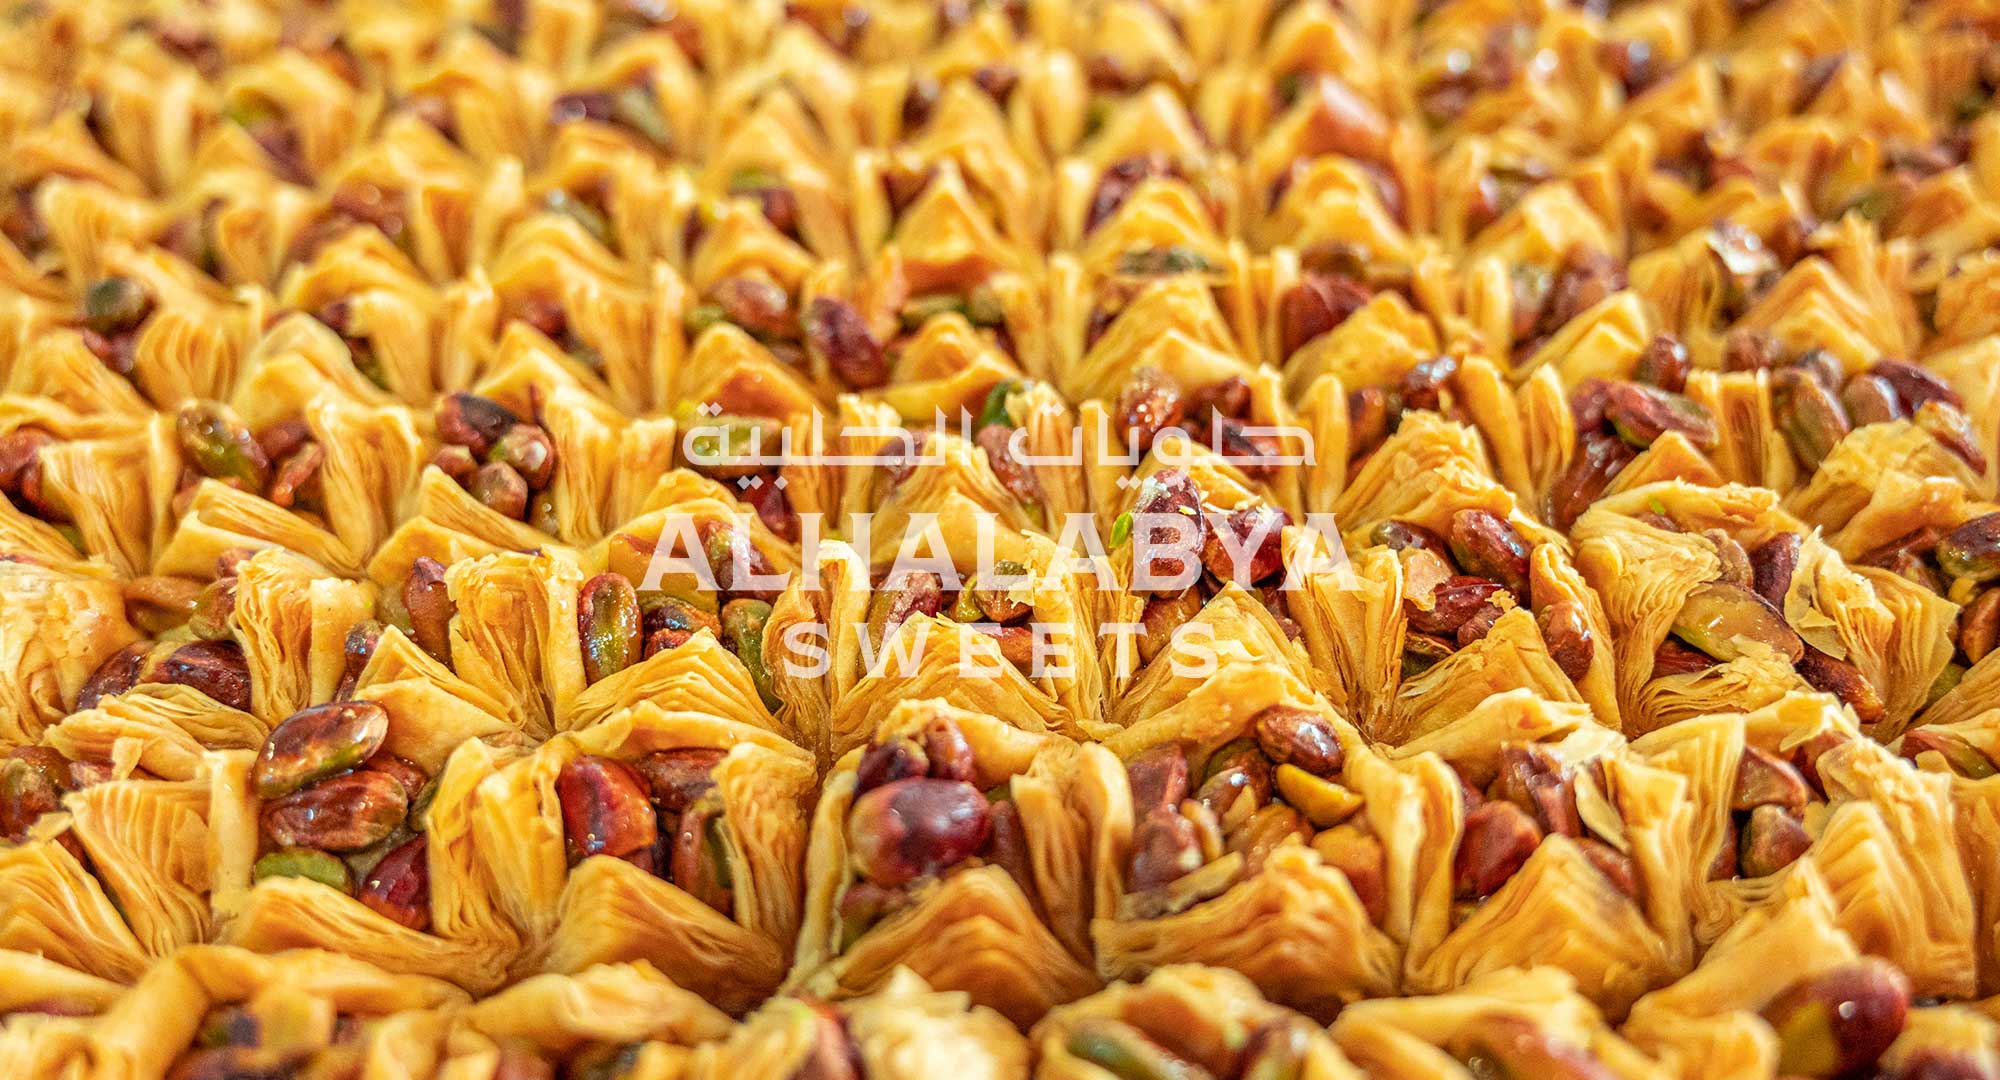 Al Halabya Sweets’ Commitment to Quality and Craftsmanship